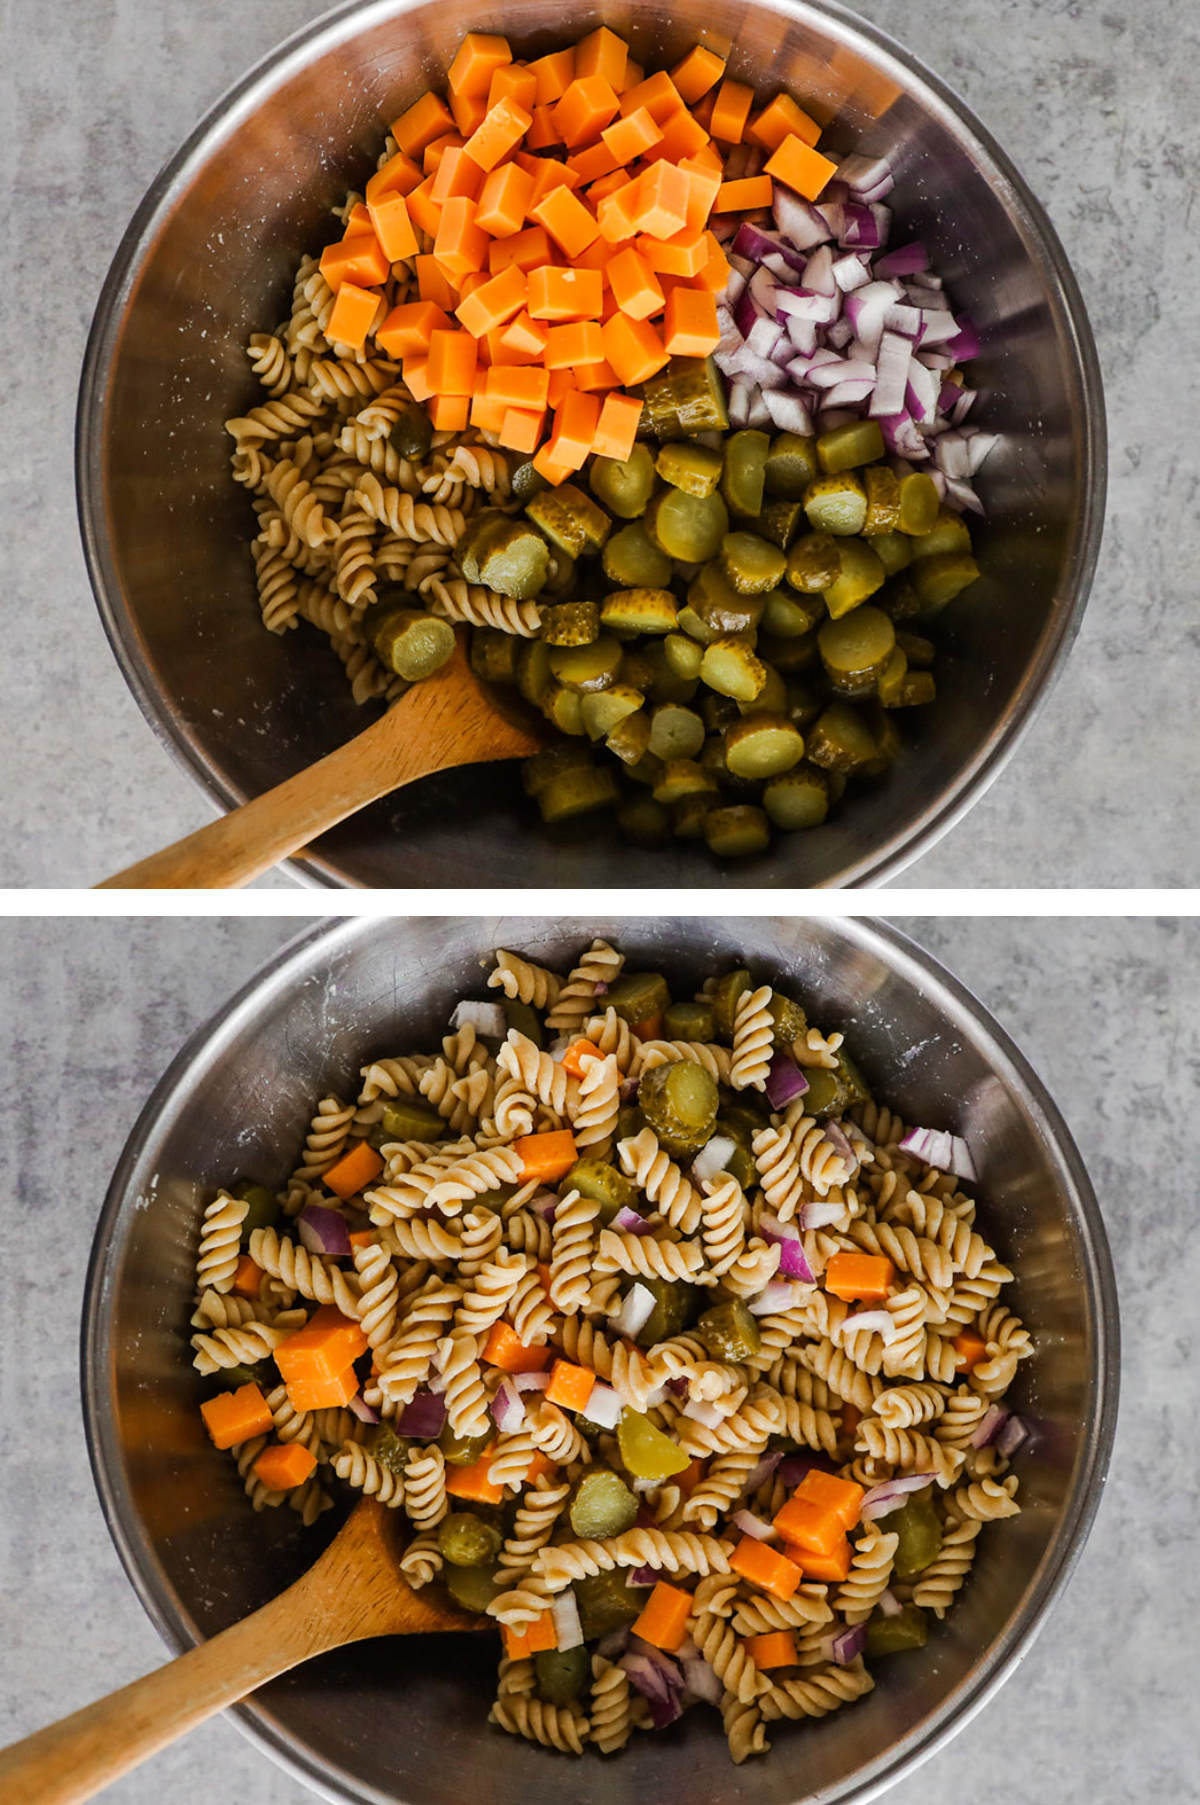 Two overhead images in one: 1. Cooled pasta is added to a large steel bowl with pickles, onion and cheese. 2. These ingredients are mixed with a wooden spoon. 